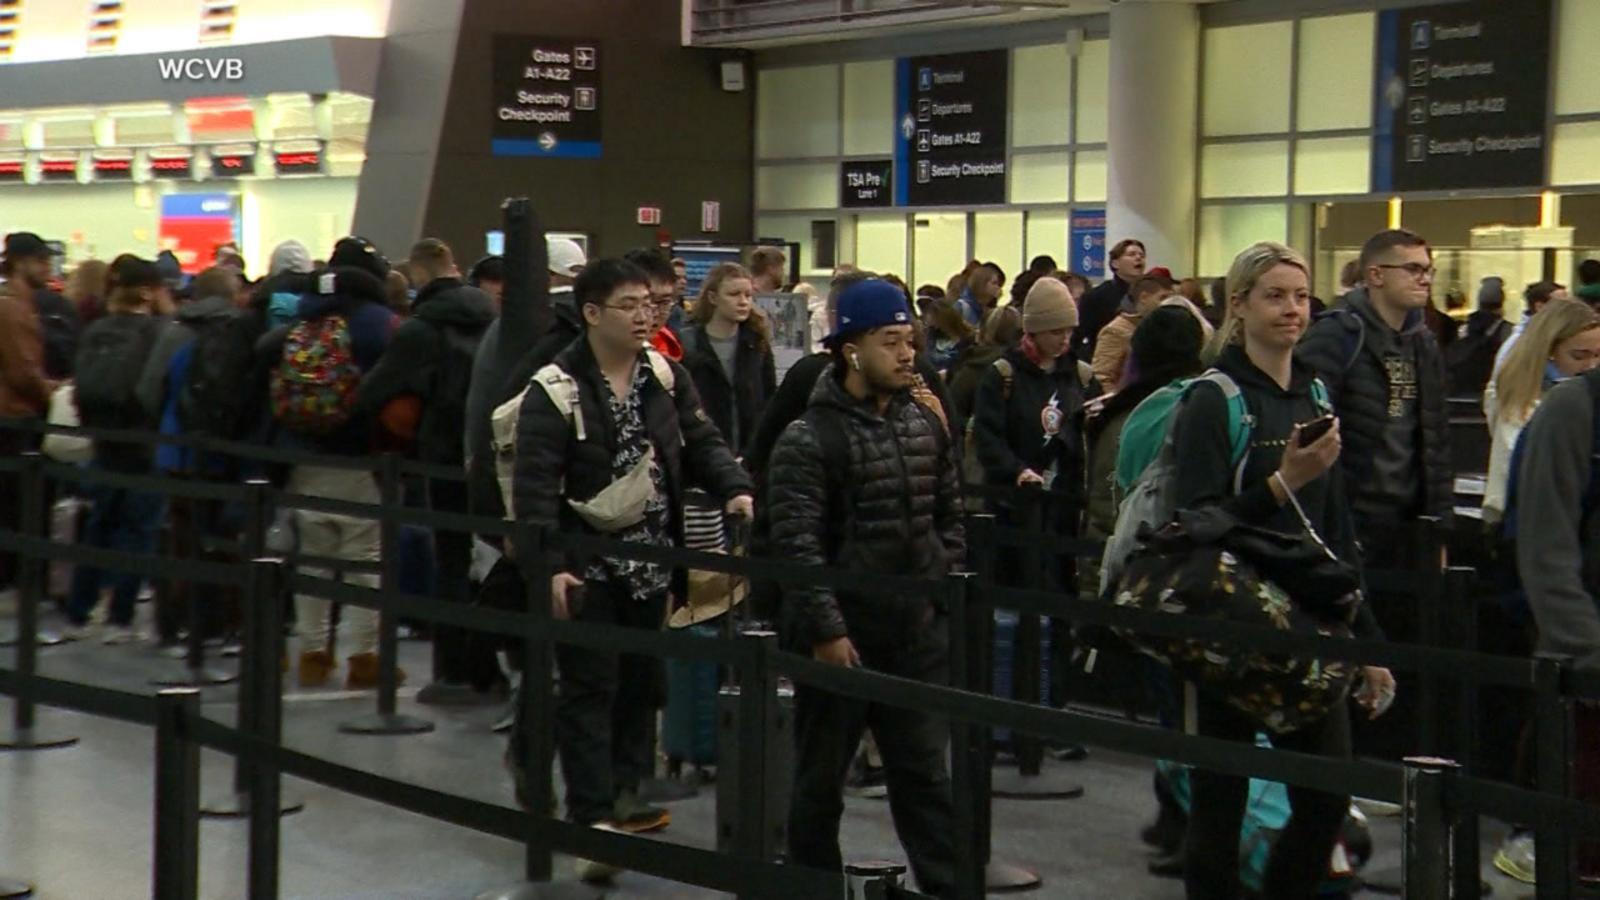 VIDEO: Smooth sailing in the skies as millions travel for Thanksgiving